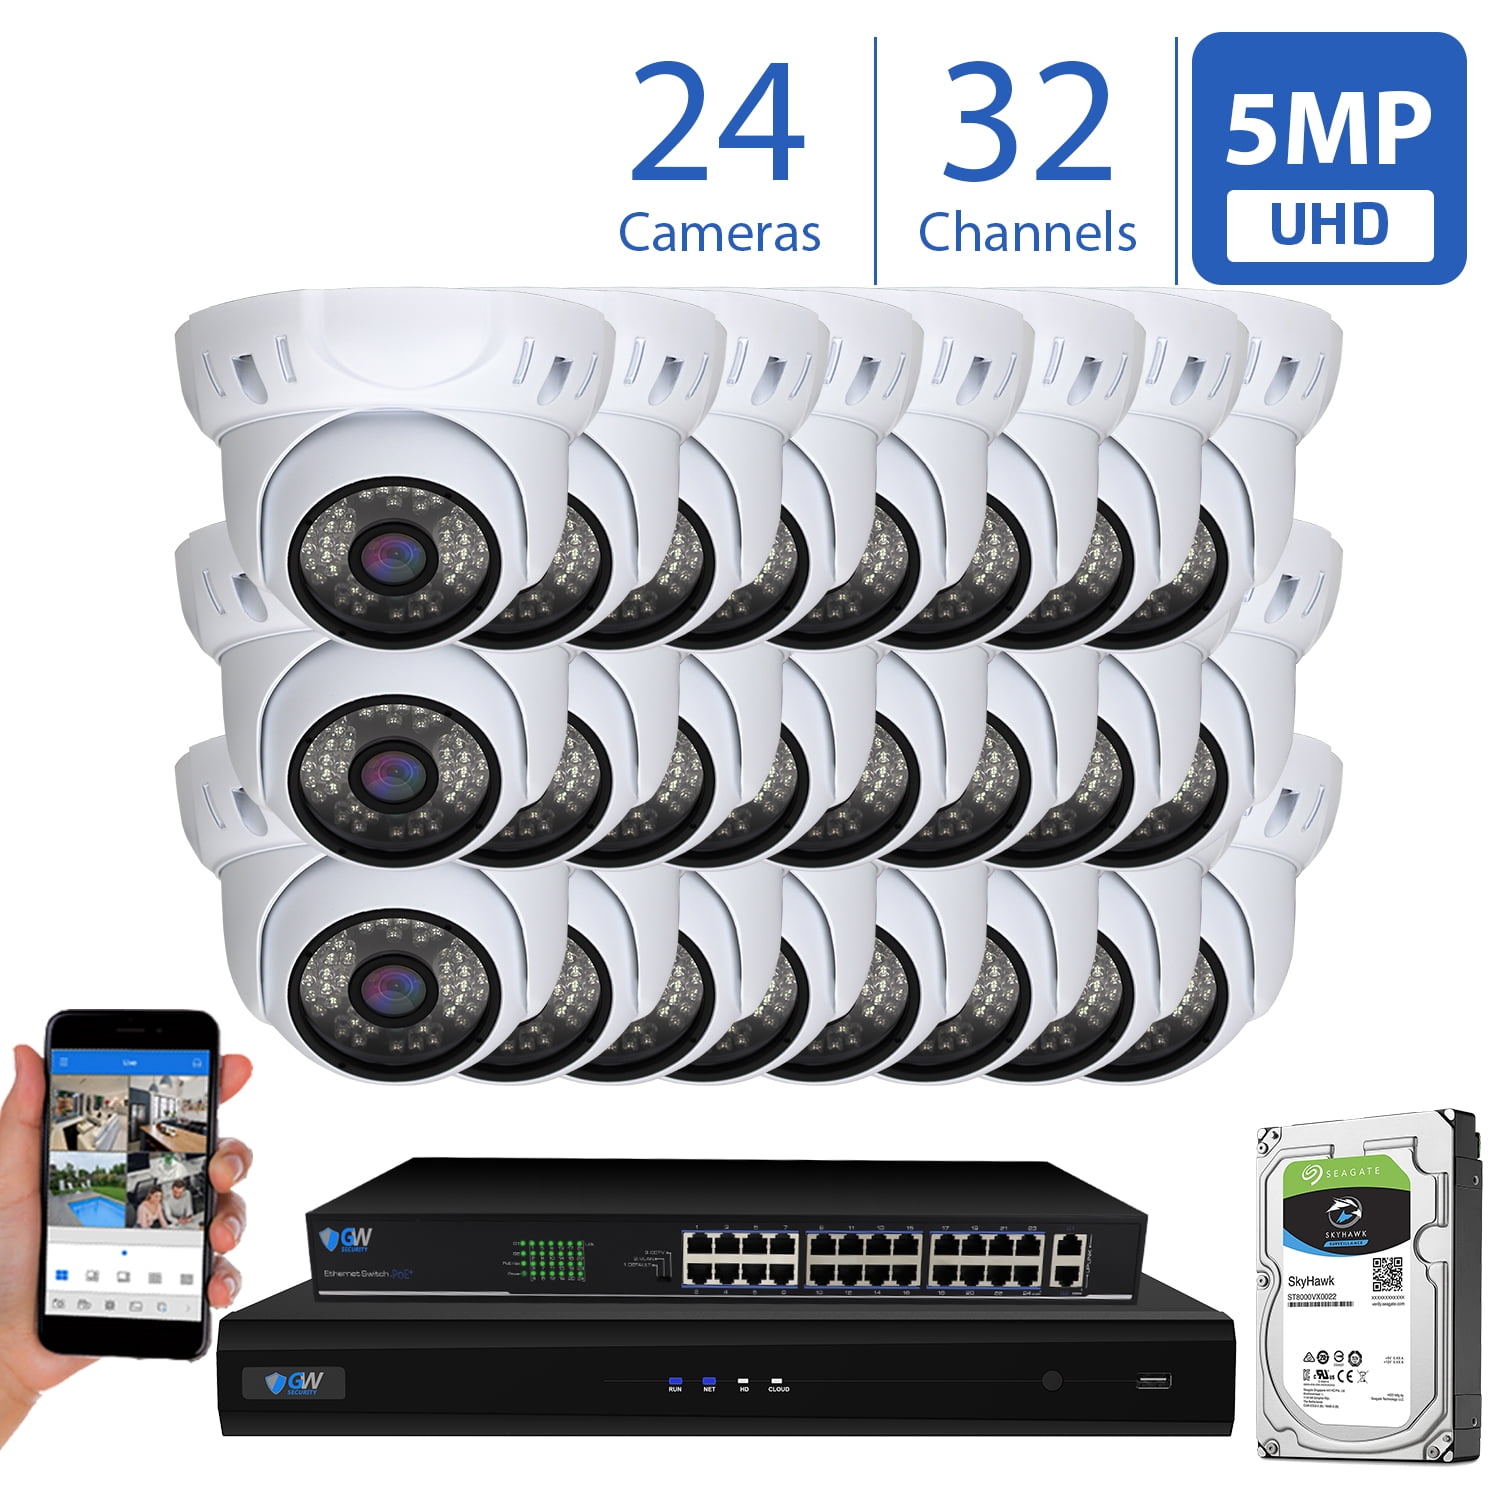 Supports Up 16 X 4K 8MP /5MP /4MP /3MP 1080P Any ONVIF IP Cameras @ 30fps Realtime Quick QR Code Smartphone Access 4TB HDD GW Security 16 Channel 4K NVR HDMI H.265 Security Network Video Recorder